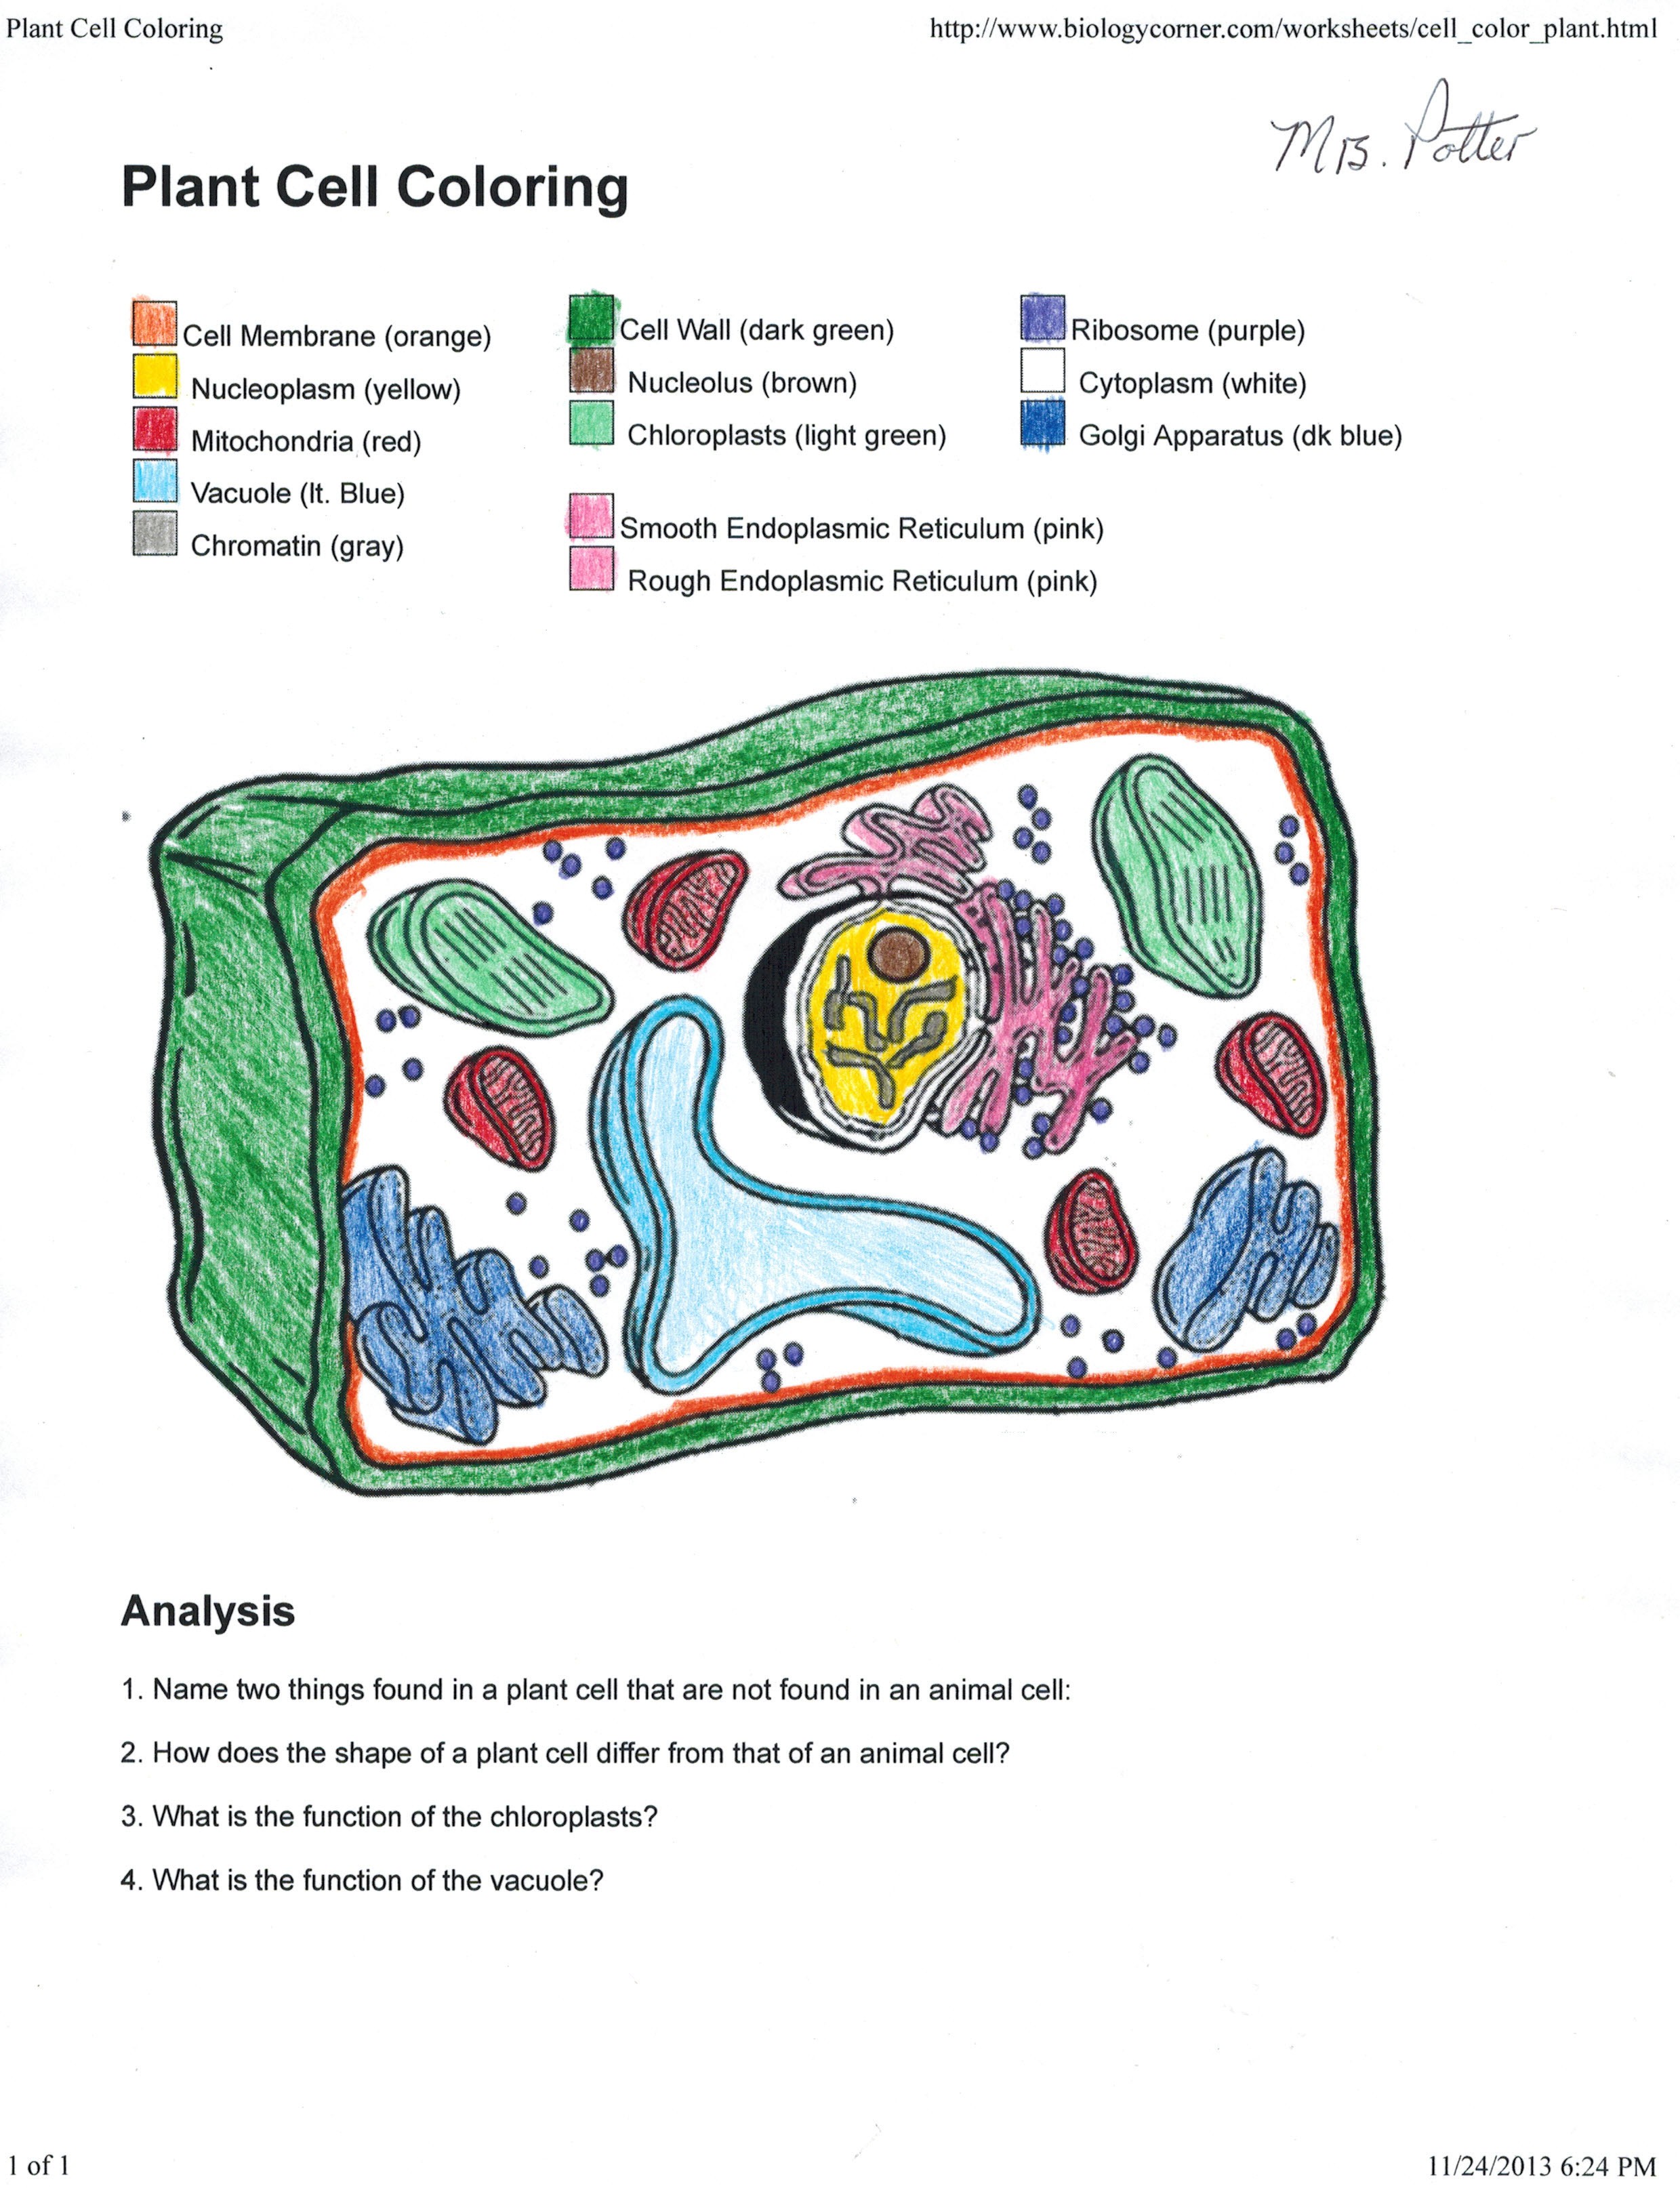 Animal Cell Coloring Page Answers